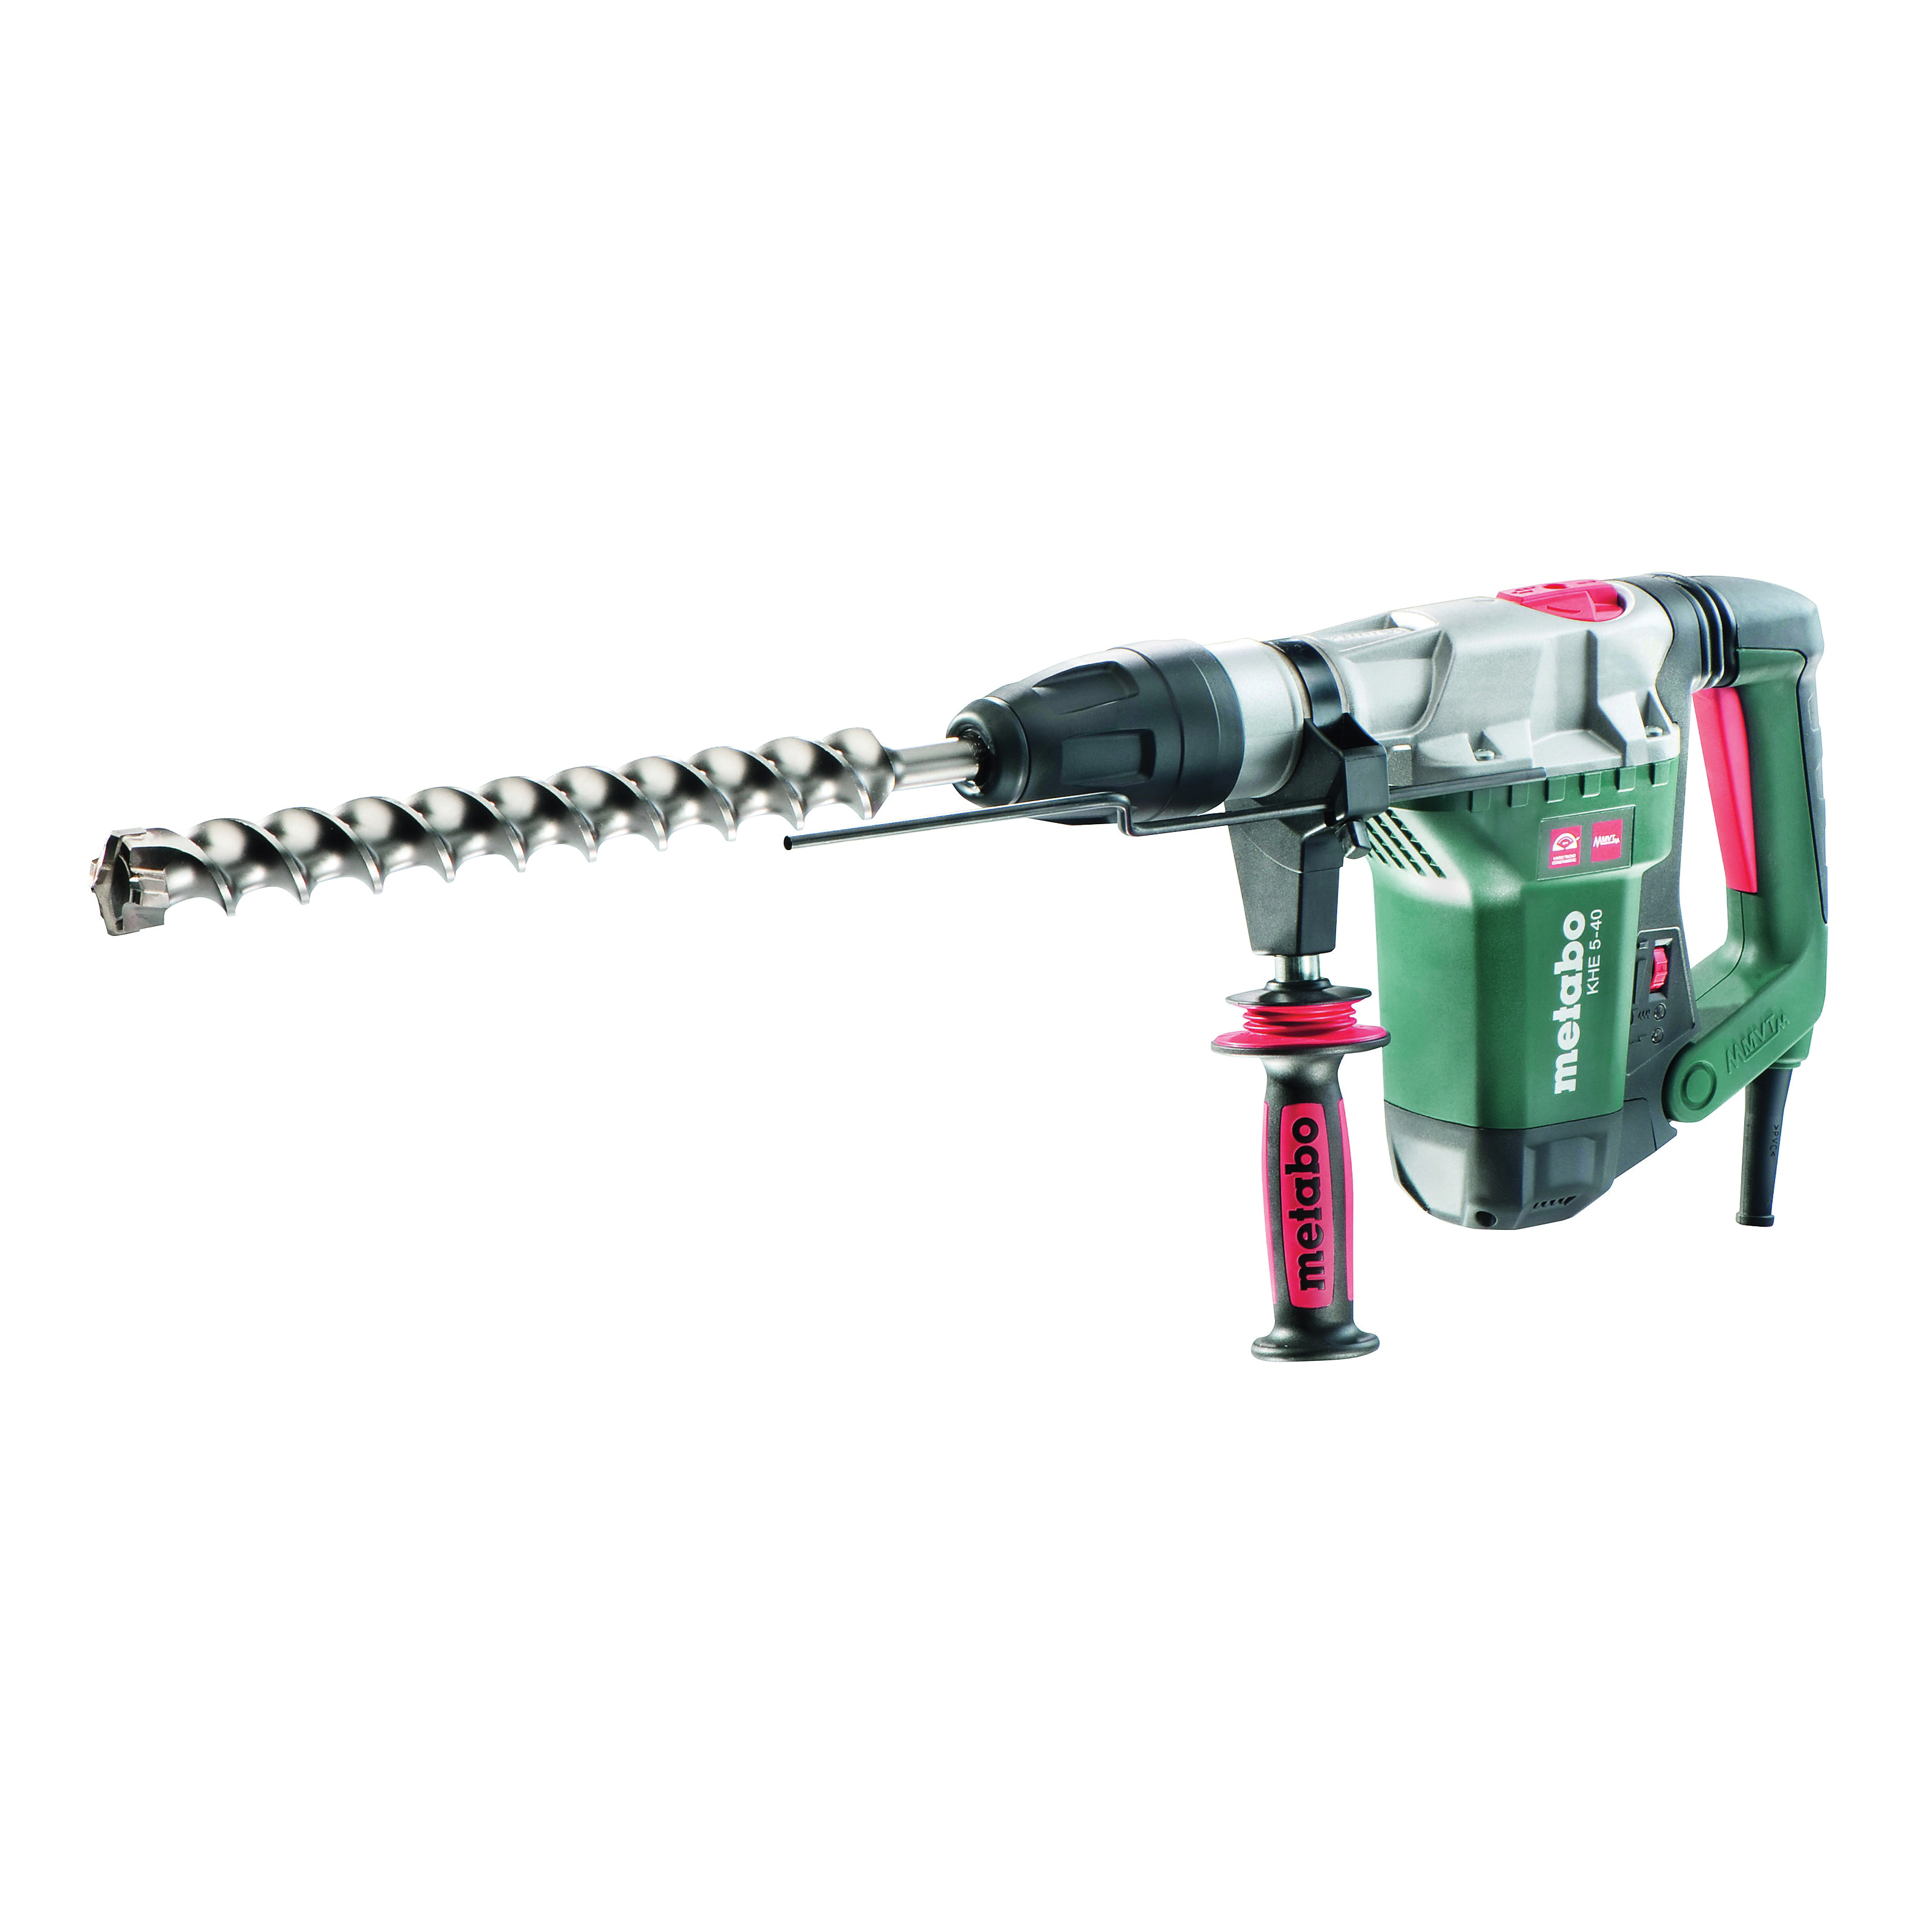 metabo® 600562420 Variable Speed Electric Angle Grinder, 5 in Dia Wheel, 5/8-11 UNC Arbor/Shank, 110 to 120 VAC